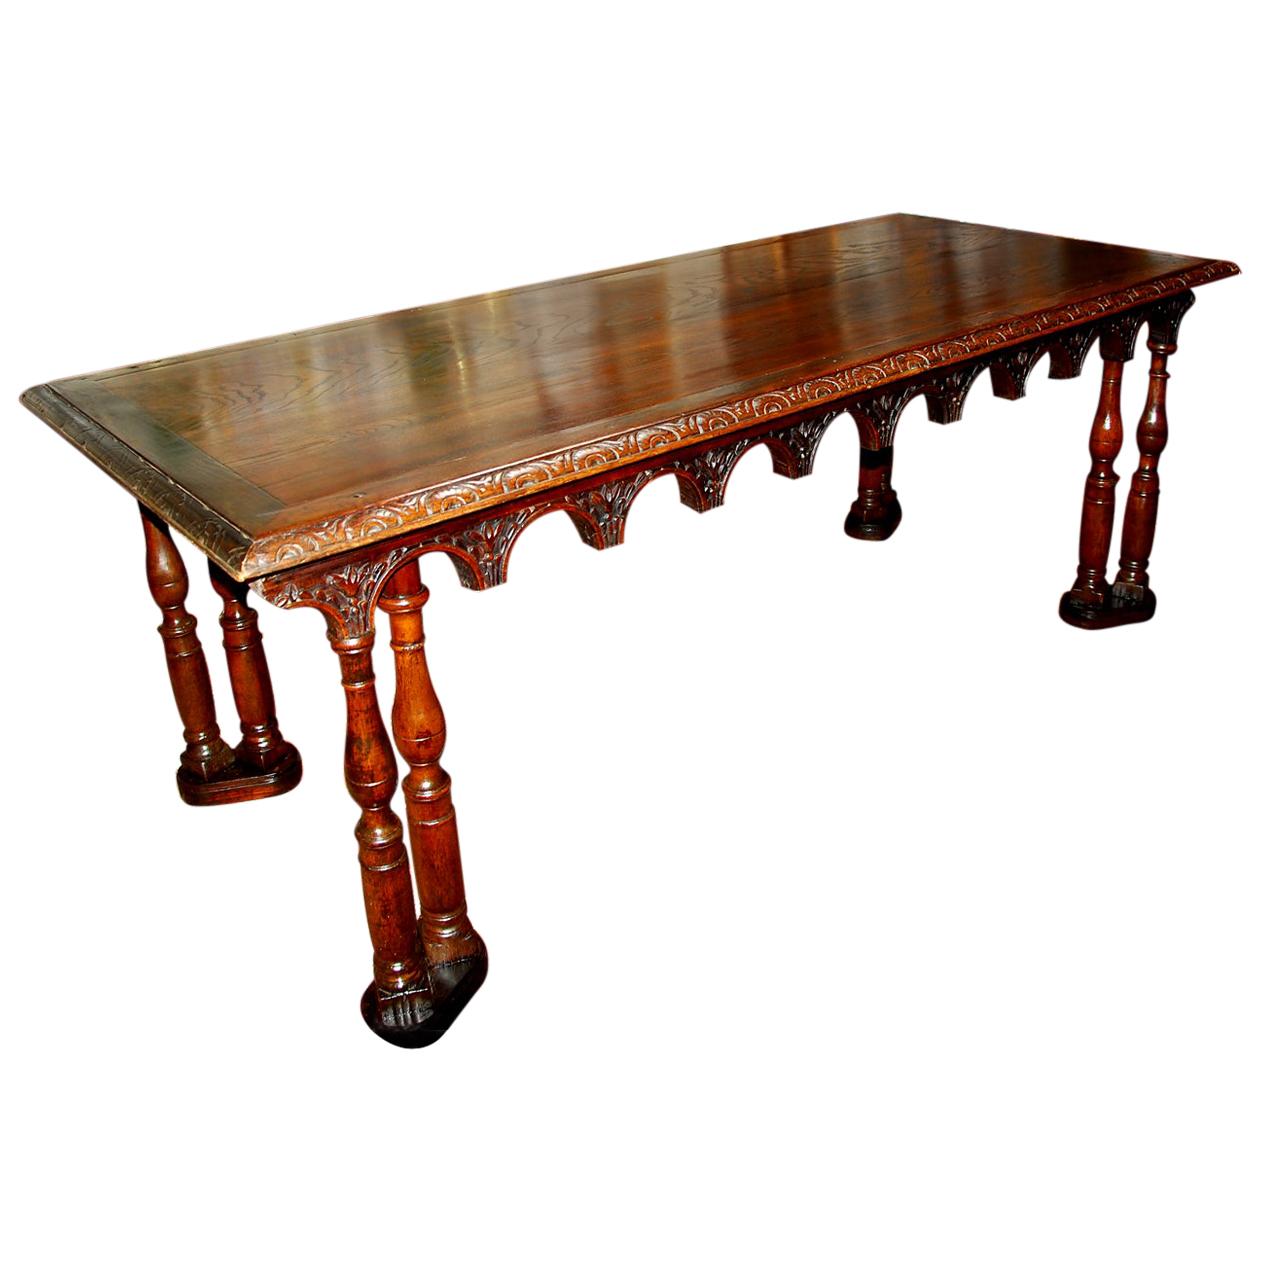 French Oak Long Dining Table Constructed from 17th Century Elements